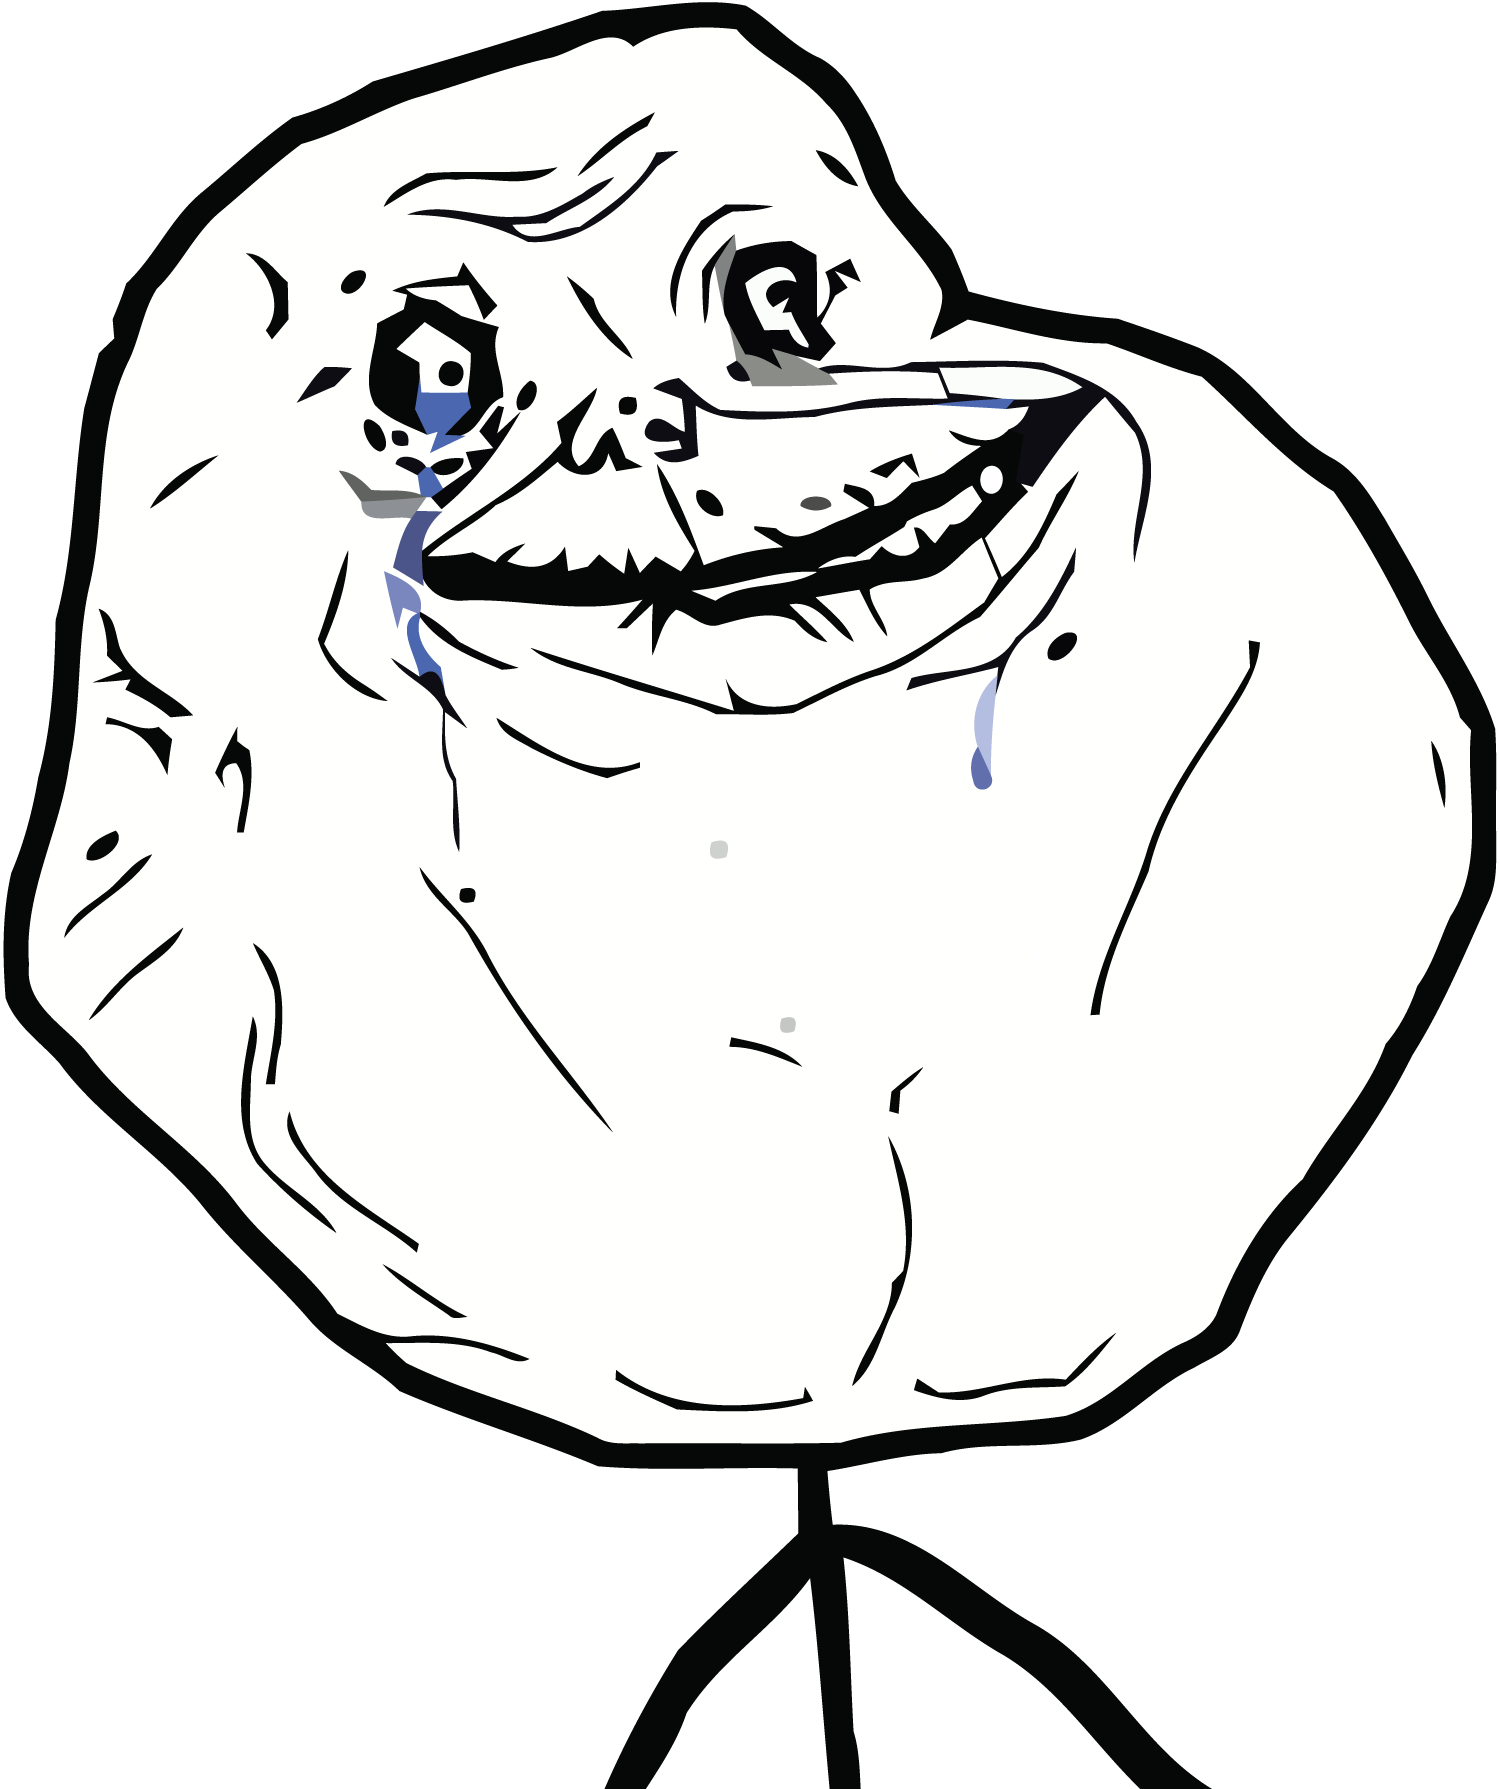 Forever Alone face meme on All The Rage Faces!